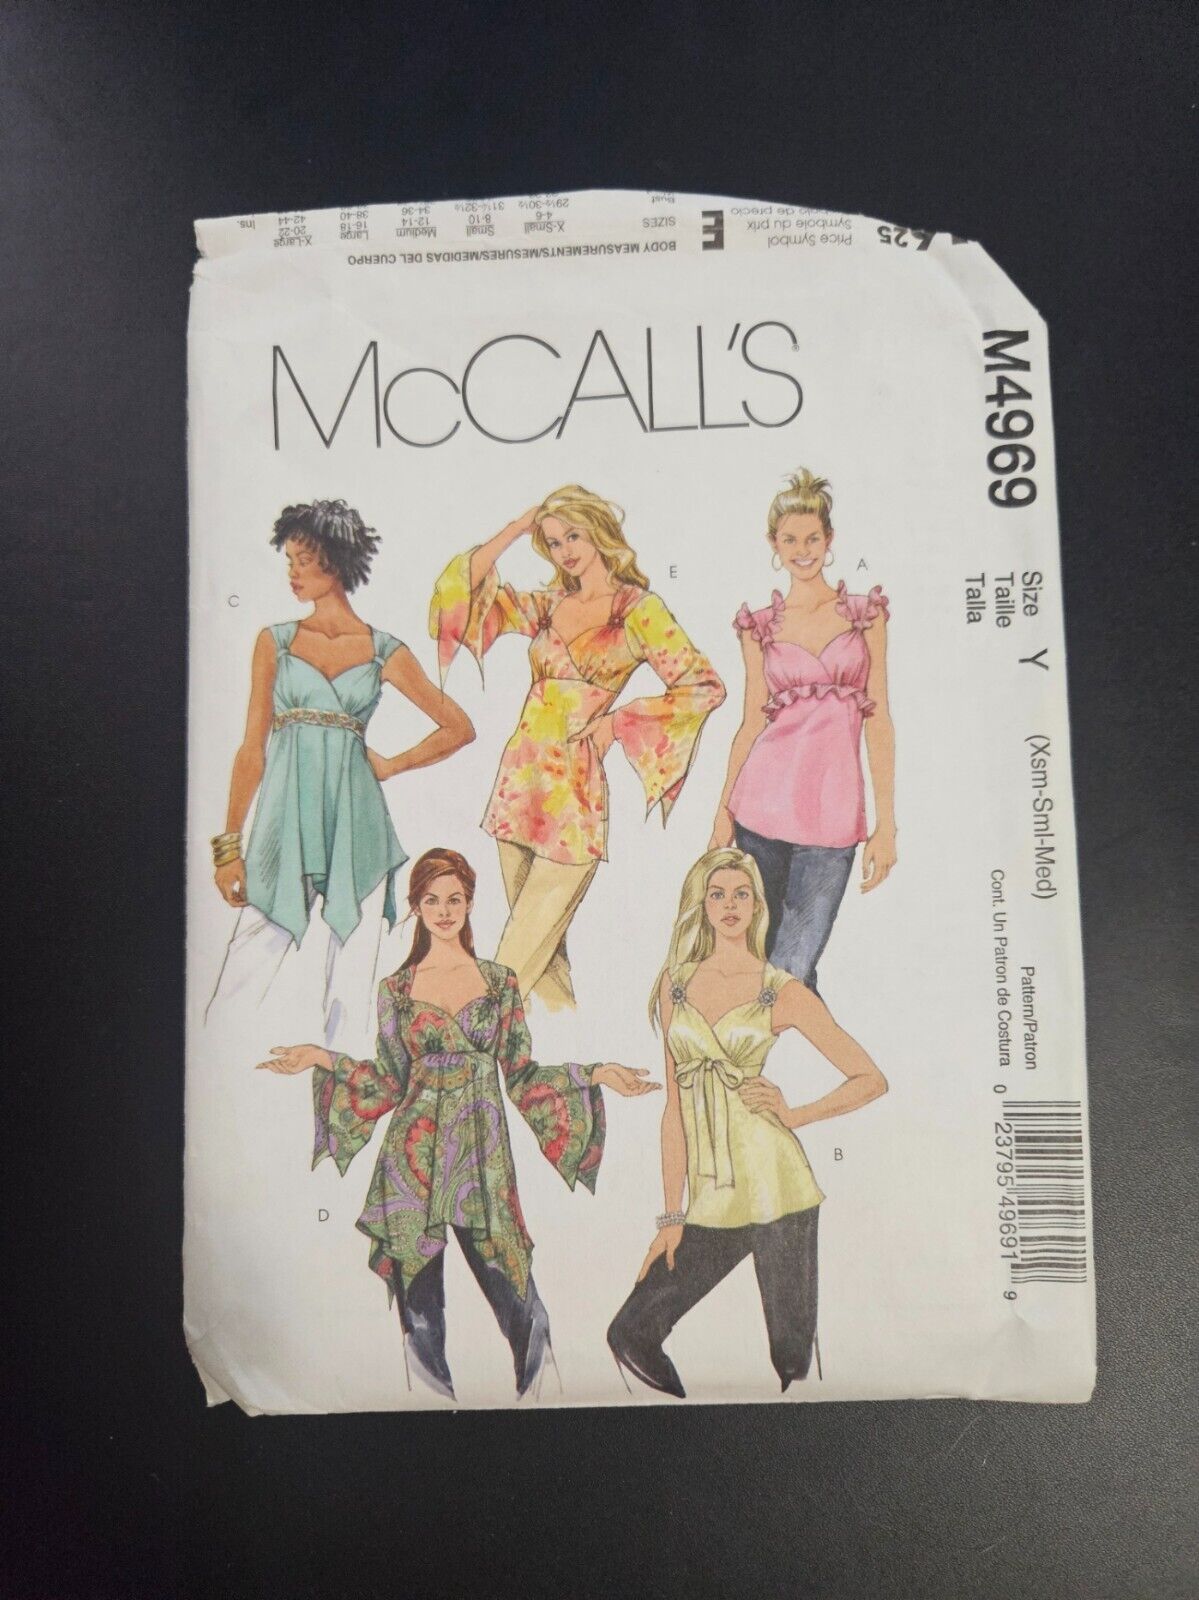 McCalls 4969 Misses/Miss Petite Top 2 Lengths Sewing Pattern xsm-sml-med